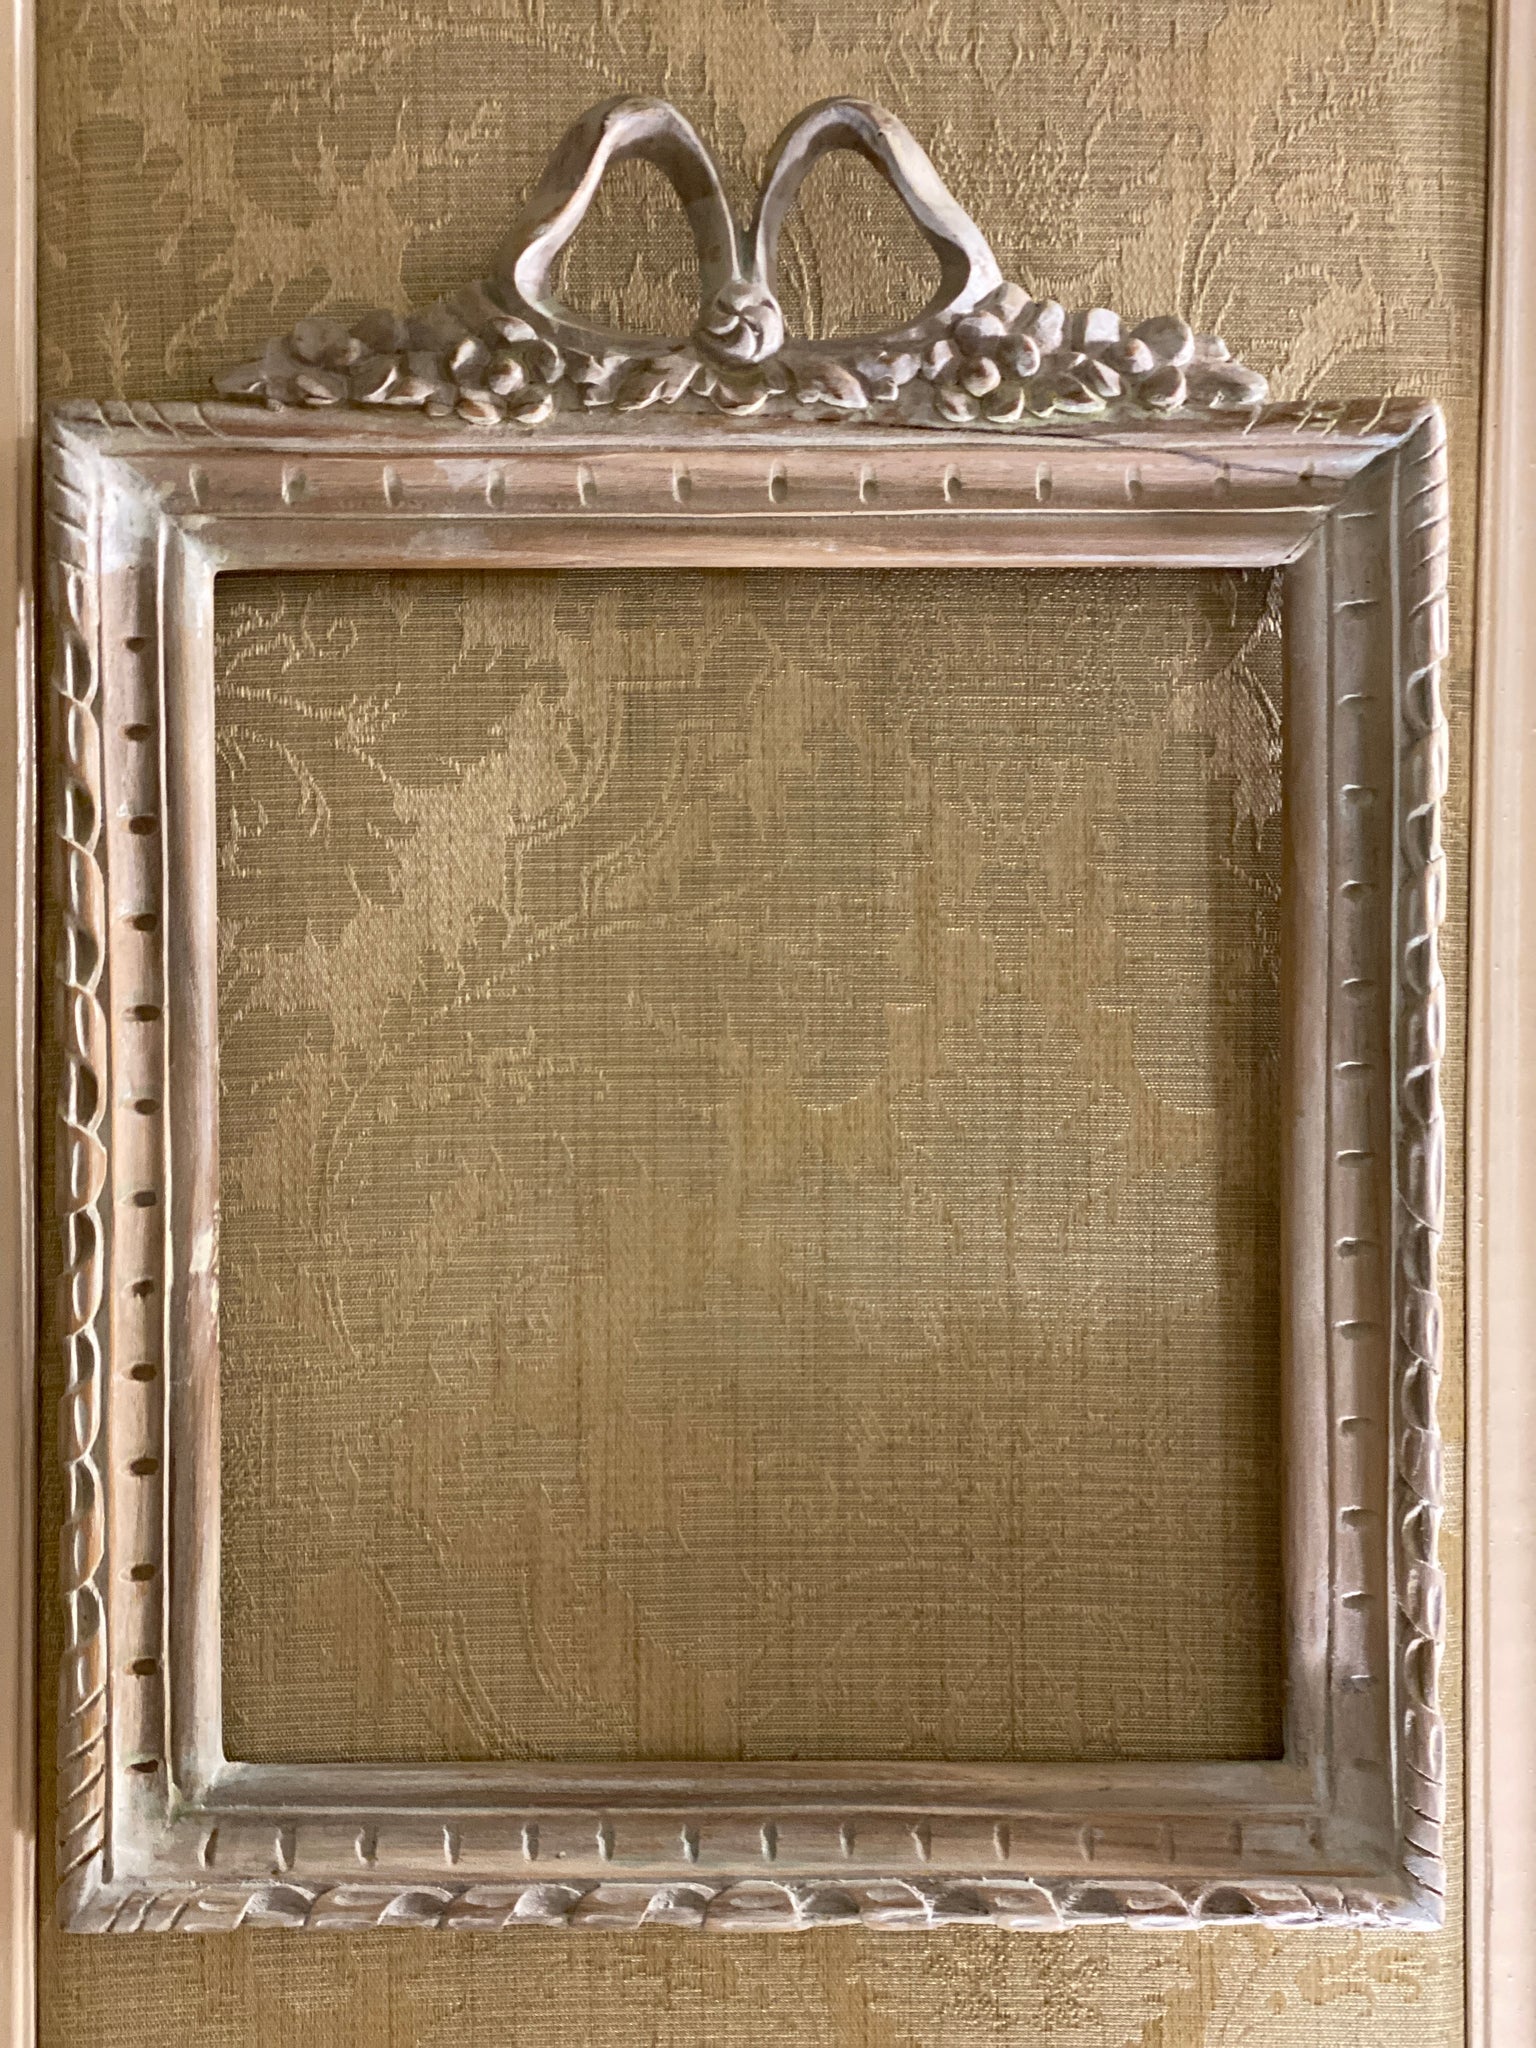 Frame in square shape from The Unfurling with delicate ribbon